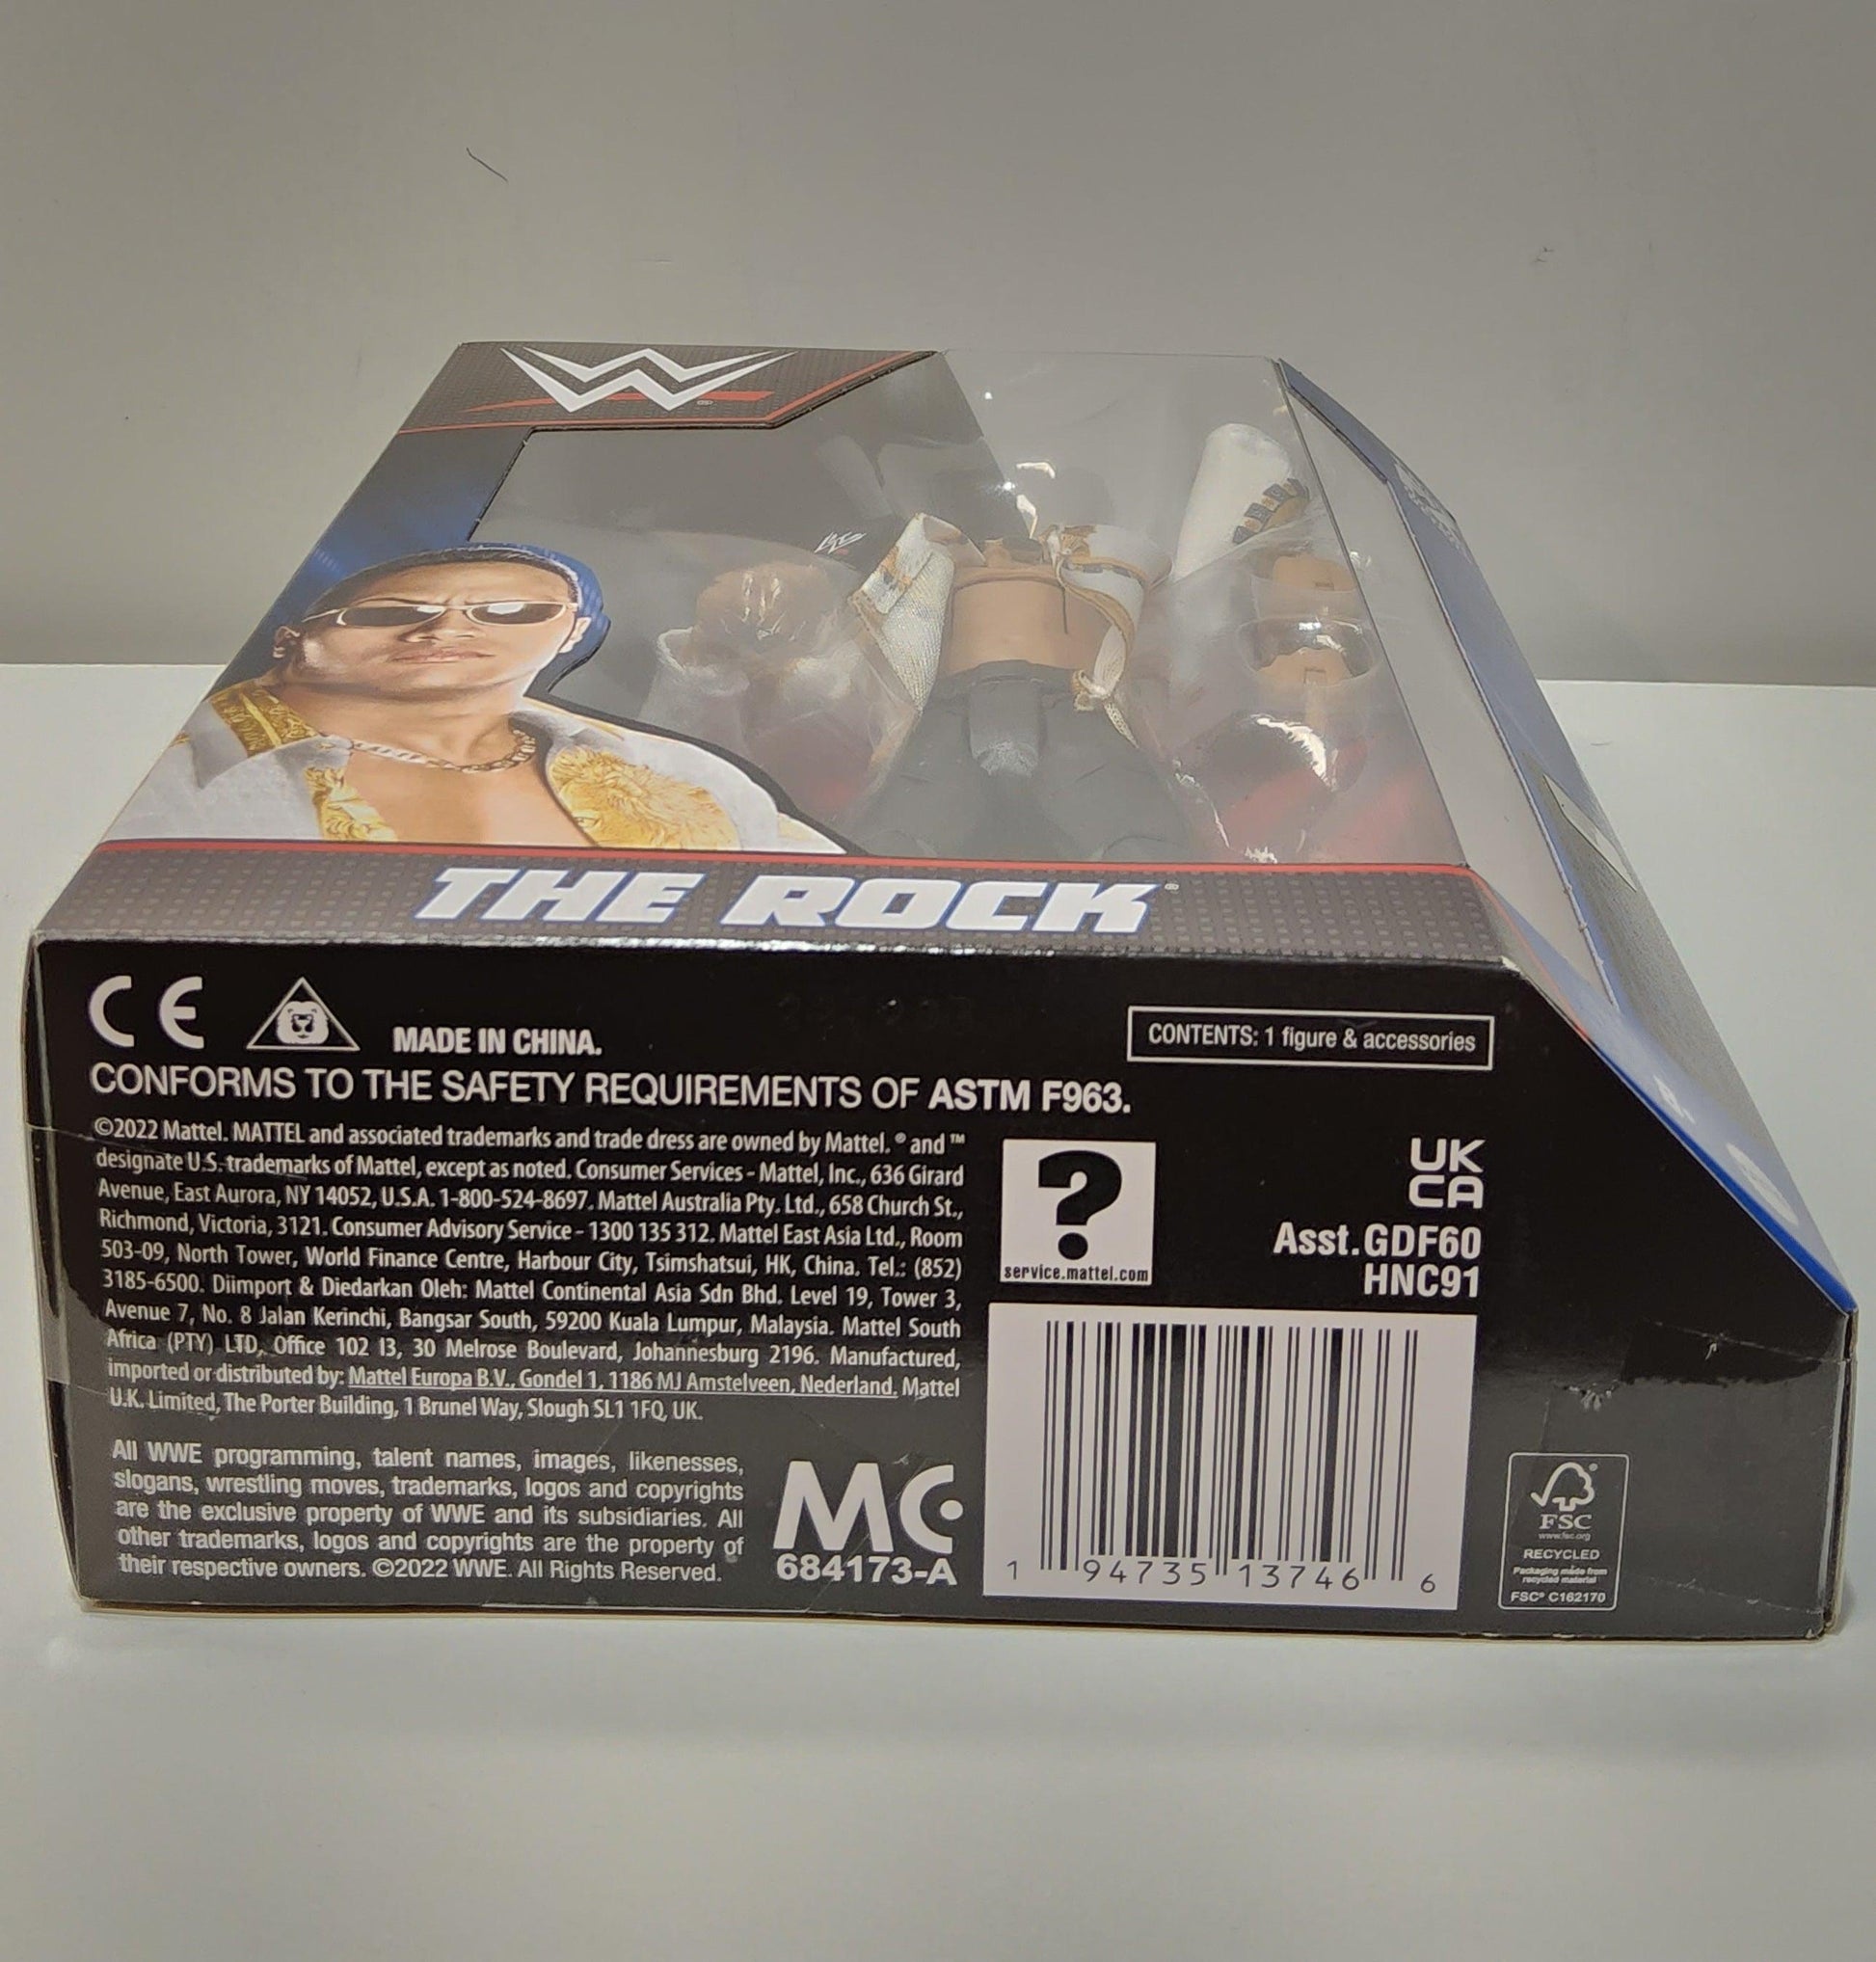 WWE - The Rock Elite Collection Greatest Hits 6” Scale Action Figure - Logan's Toy Chest